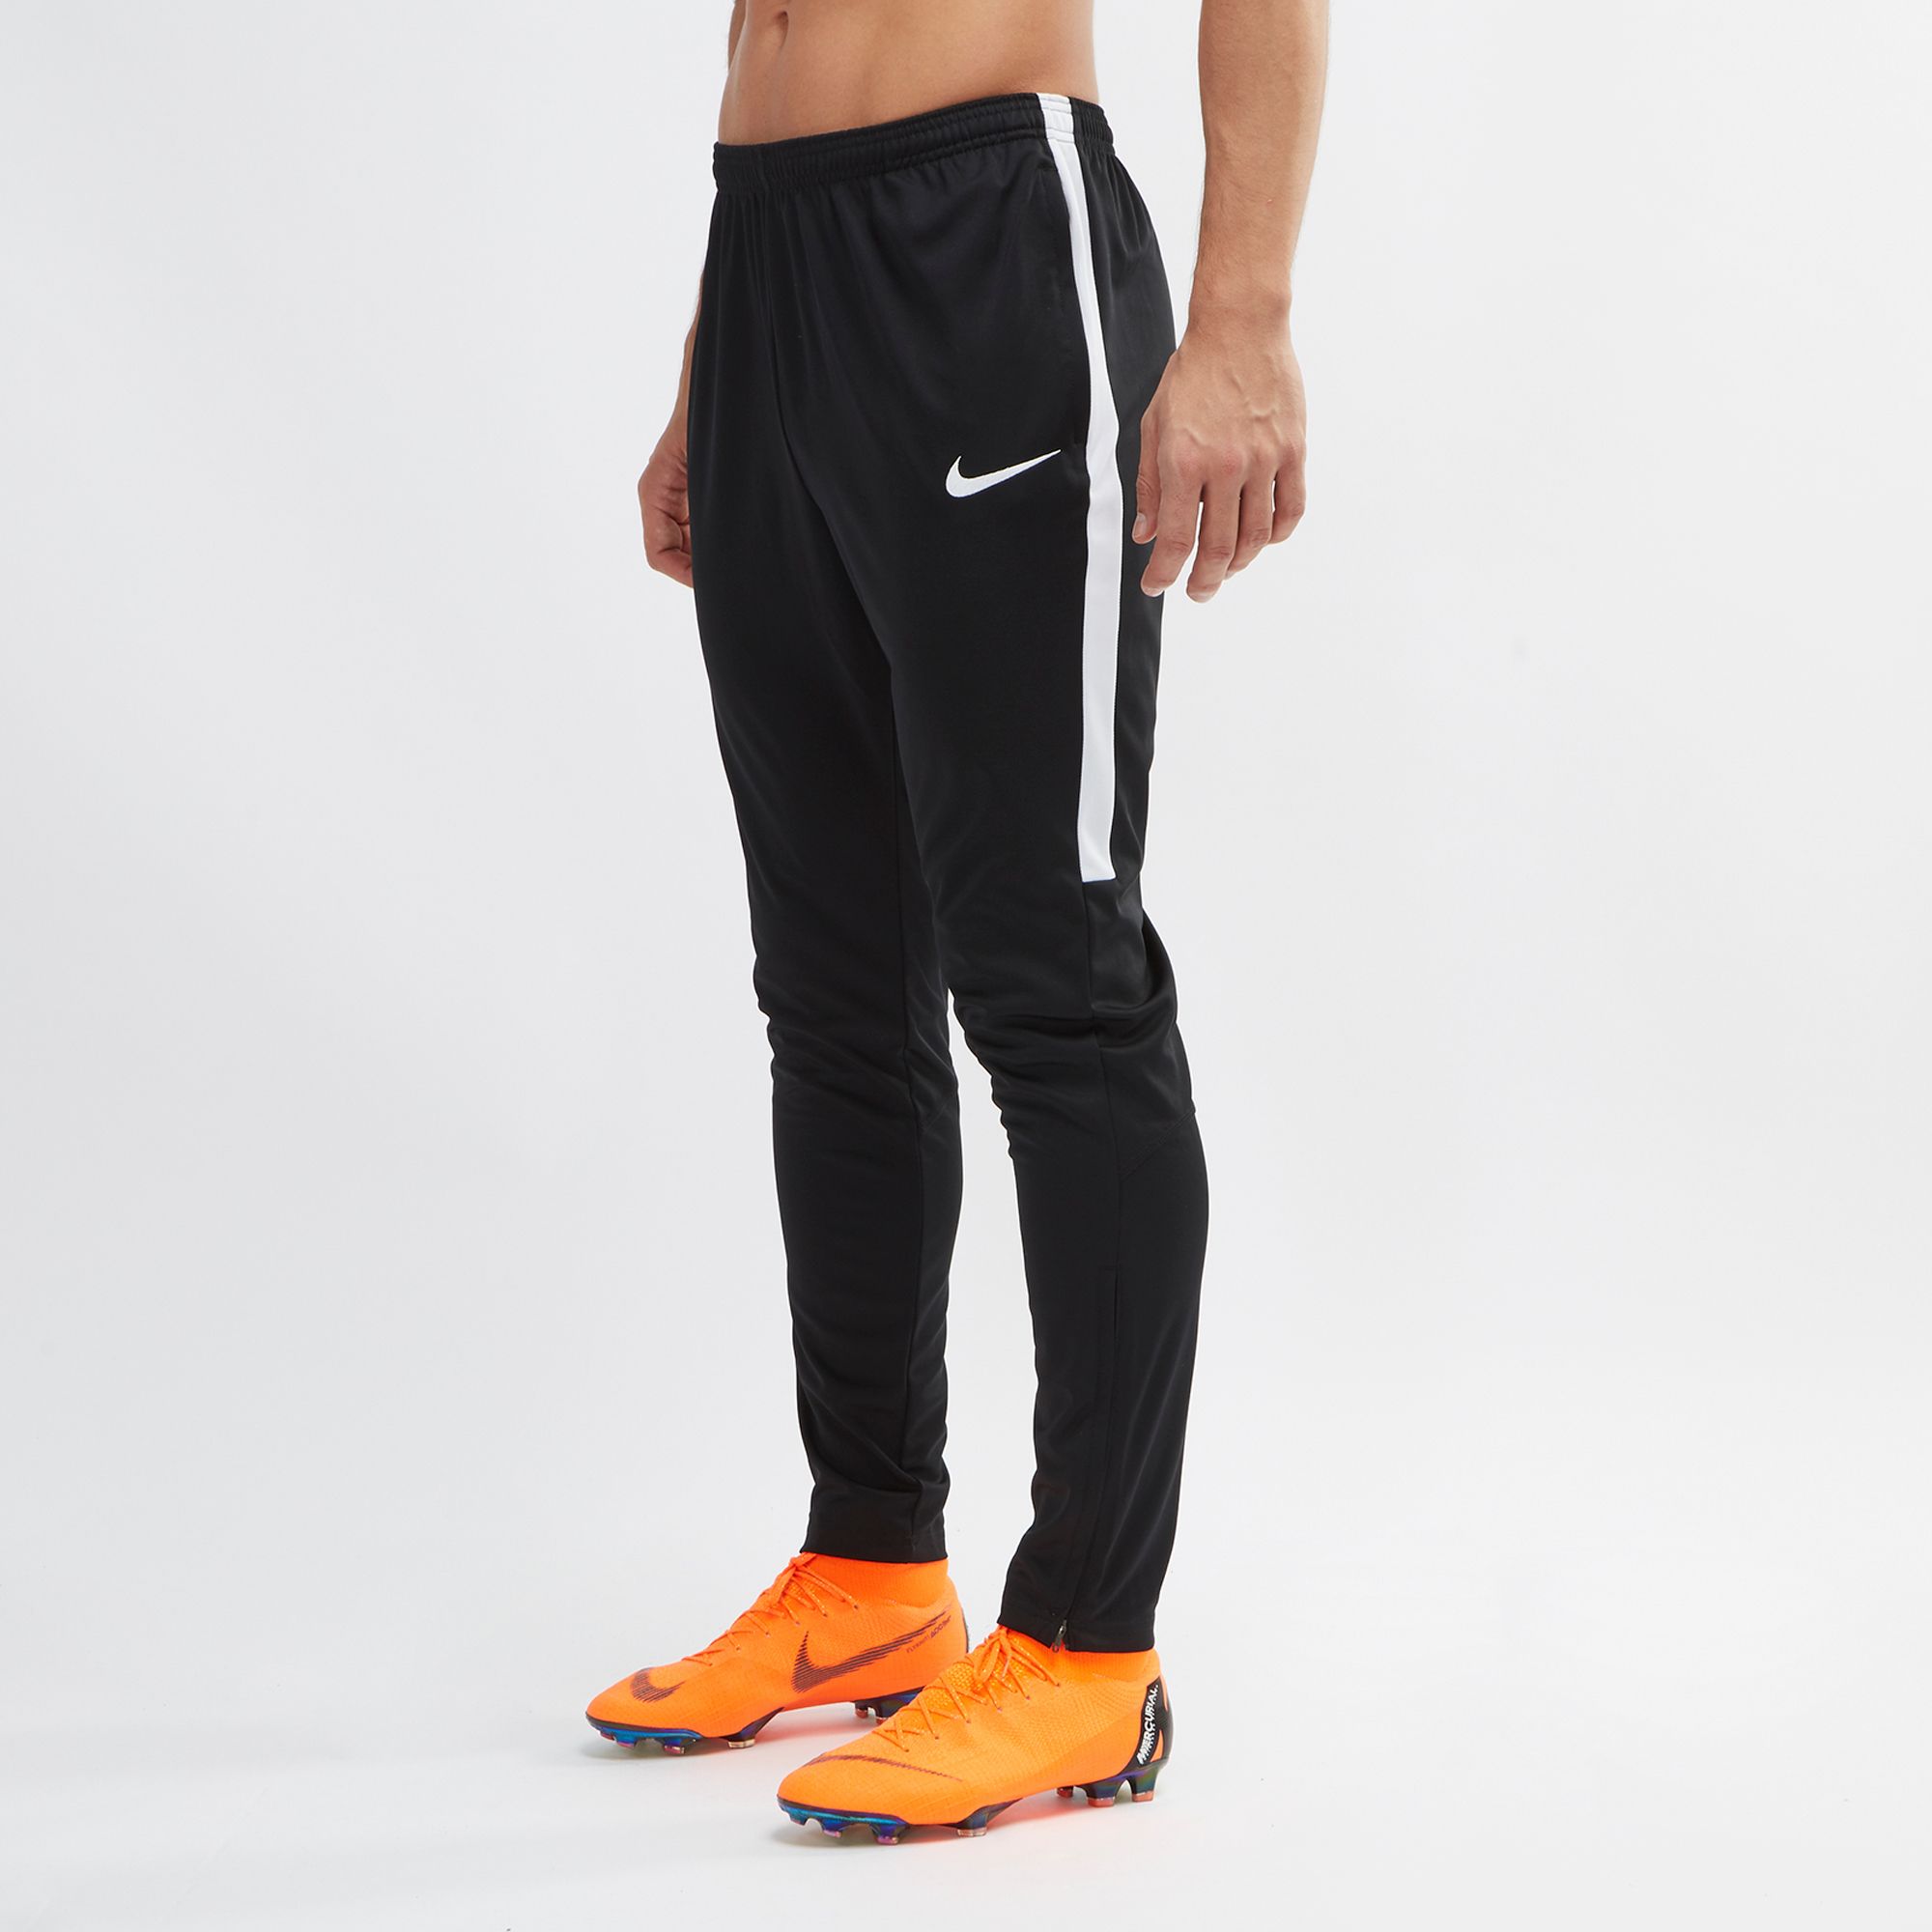 Shop Black Nike Dry Academy Football Pants for Mens by Nike | SSS